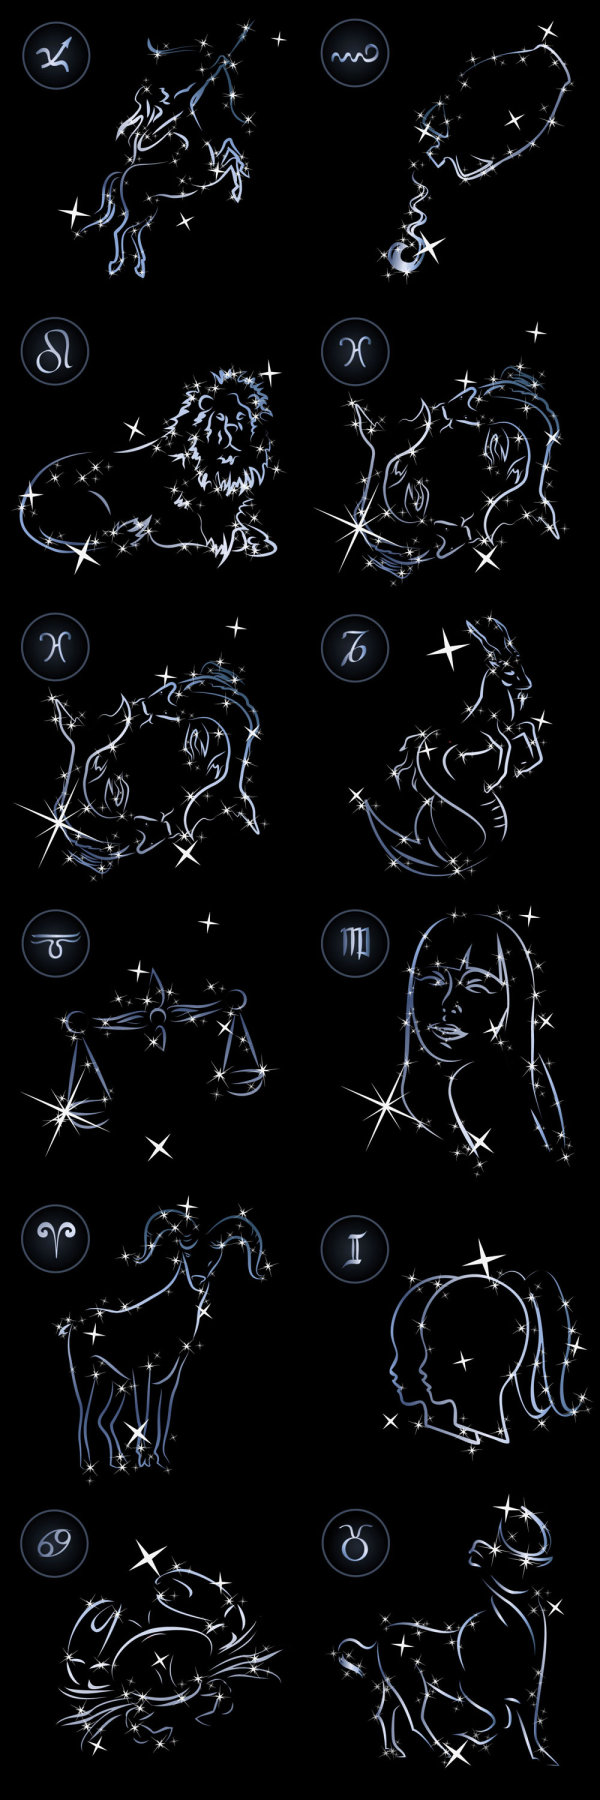 Elements of 12 constellations vector